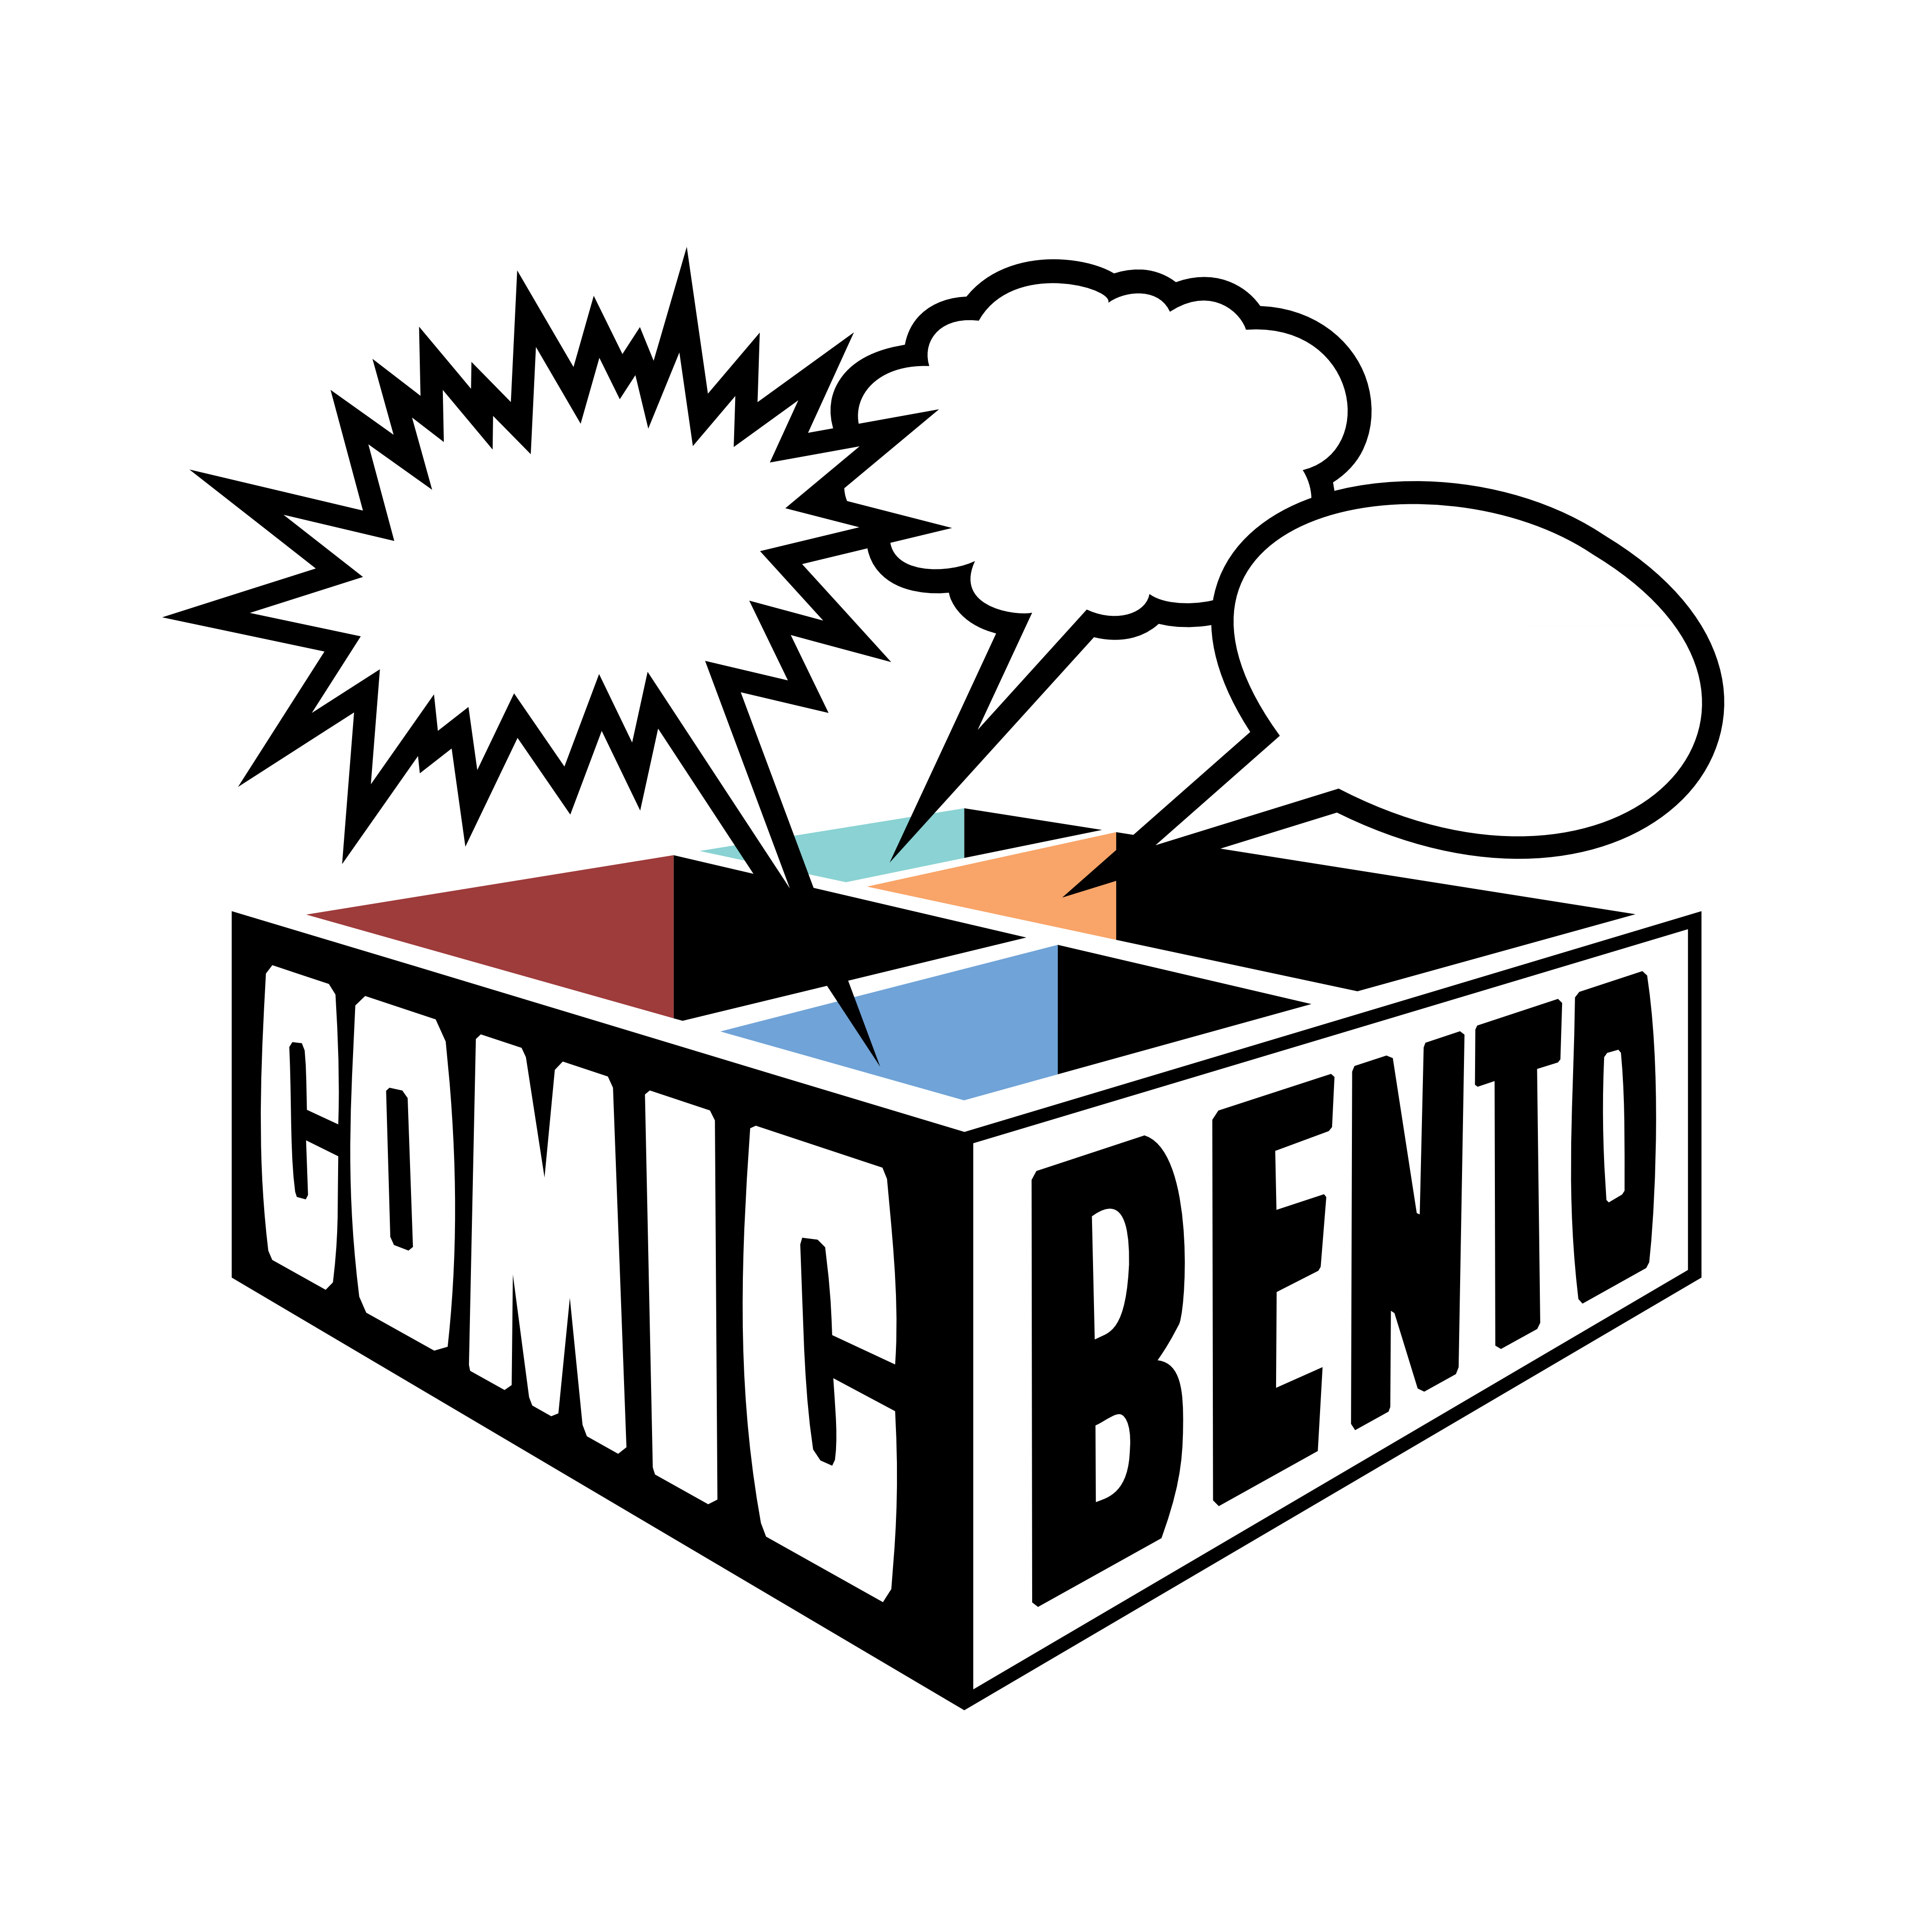 Comic bento is the thing you never knew you needed – so i’m telling you